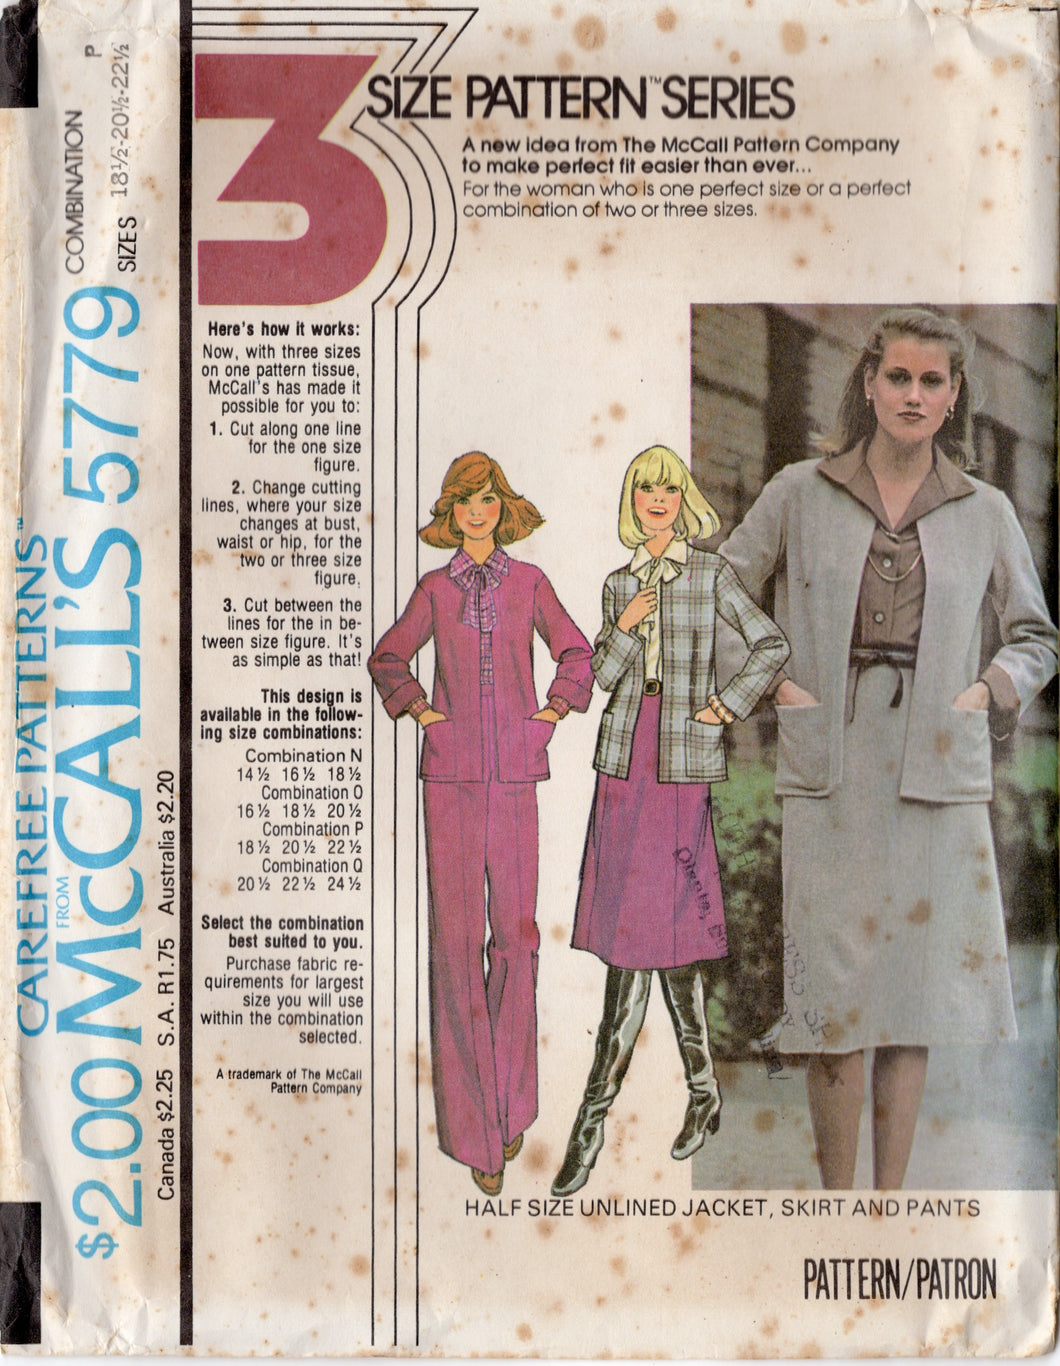 1970's McCall's Half Size Unlined Jacket, 6 Gore Skirt and Wide